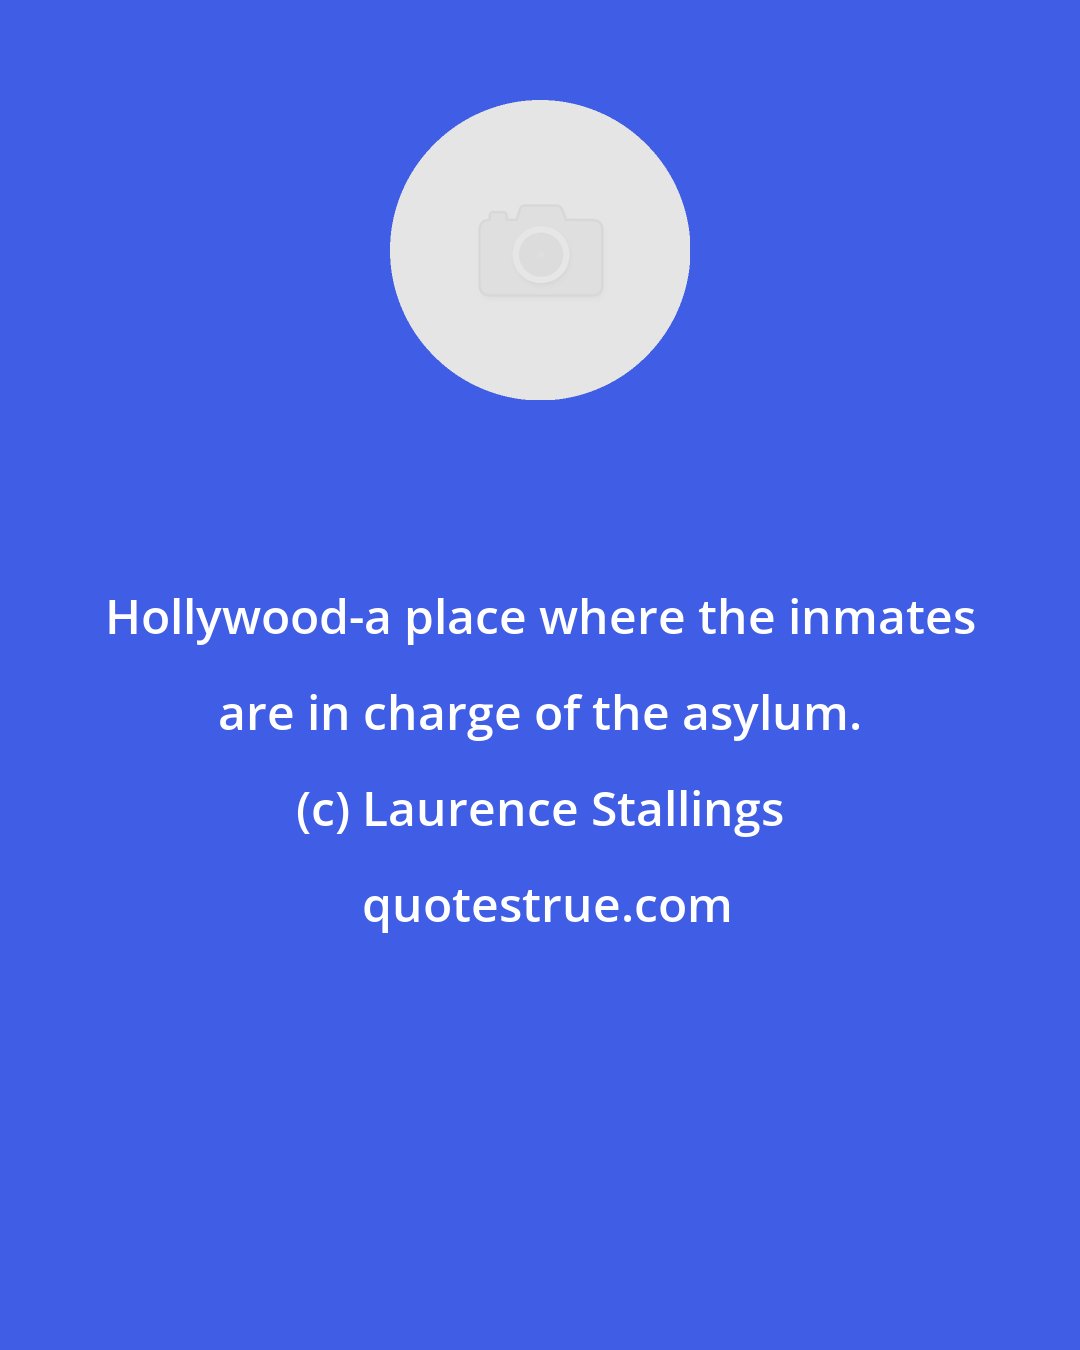 Laurence Stallings: Hollywood-a place where the inmates are in charge of the asylum.